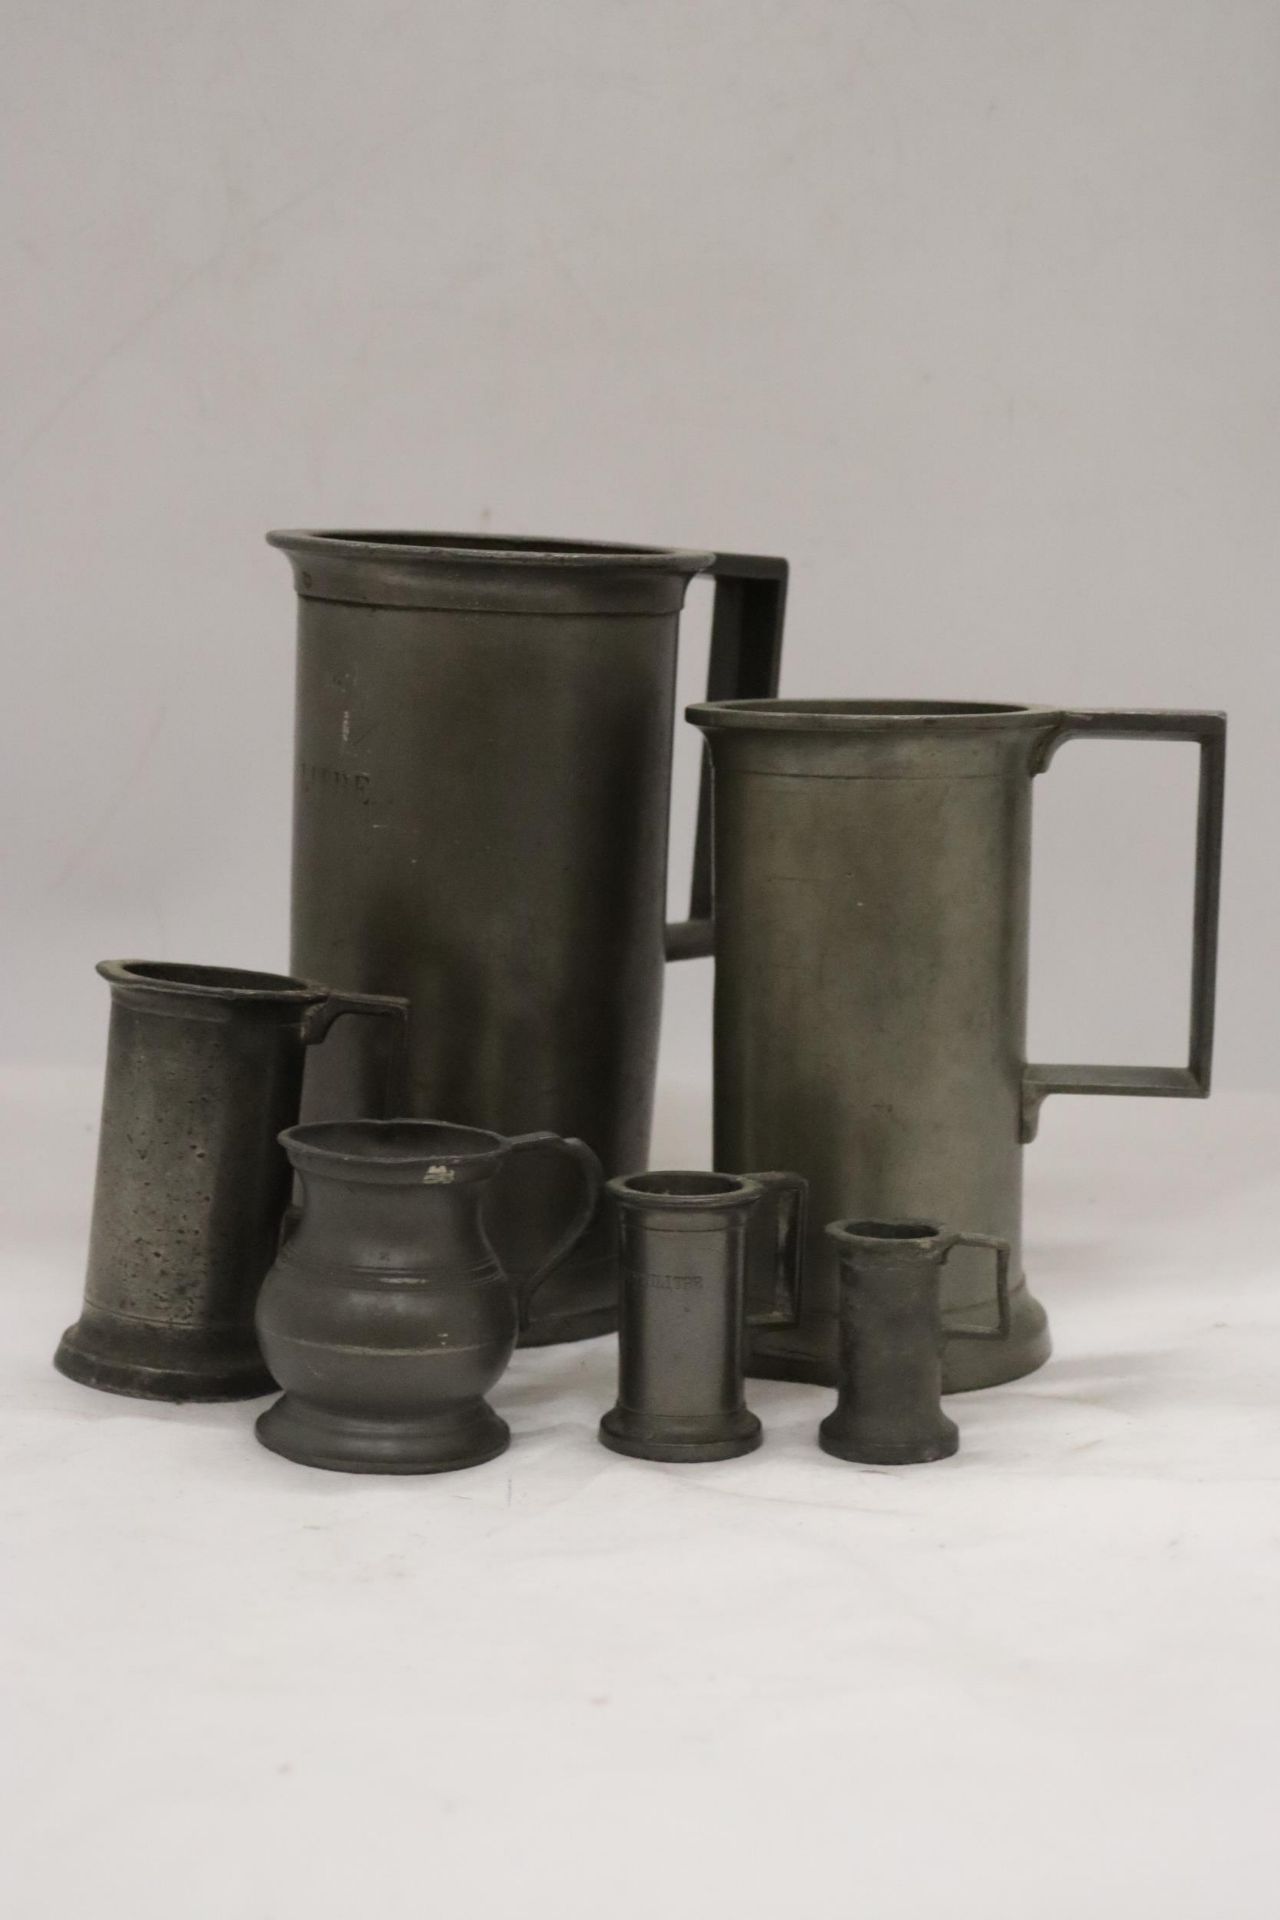 A COLLECTION OF ANTIQUE FRENCH PEWTER TANKARDS OF VARYING SIZES - 6 IN TOTAL